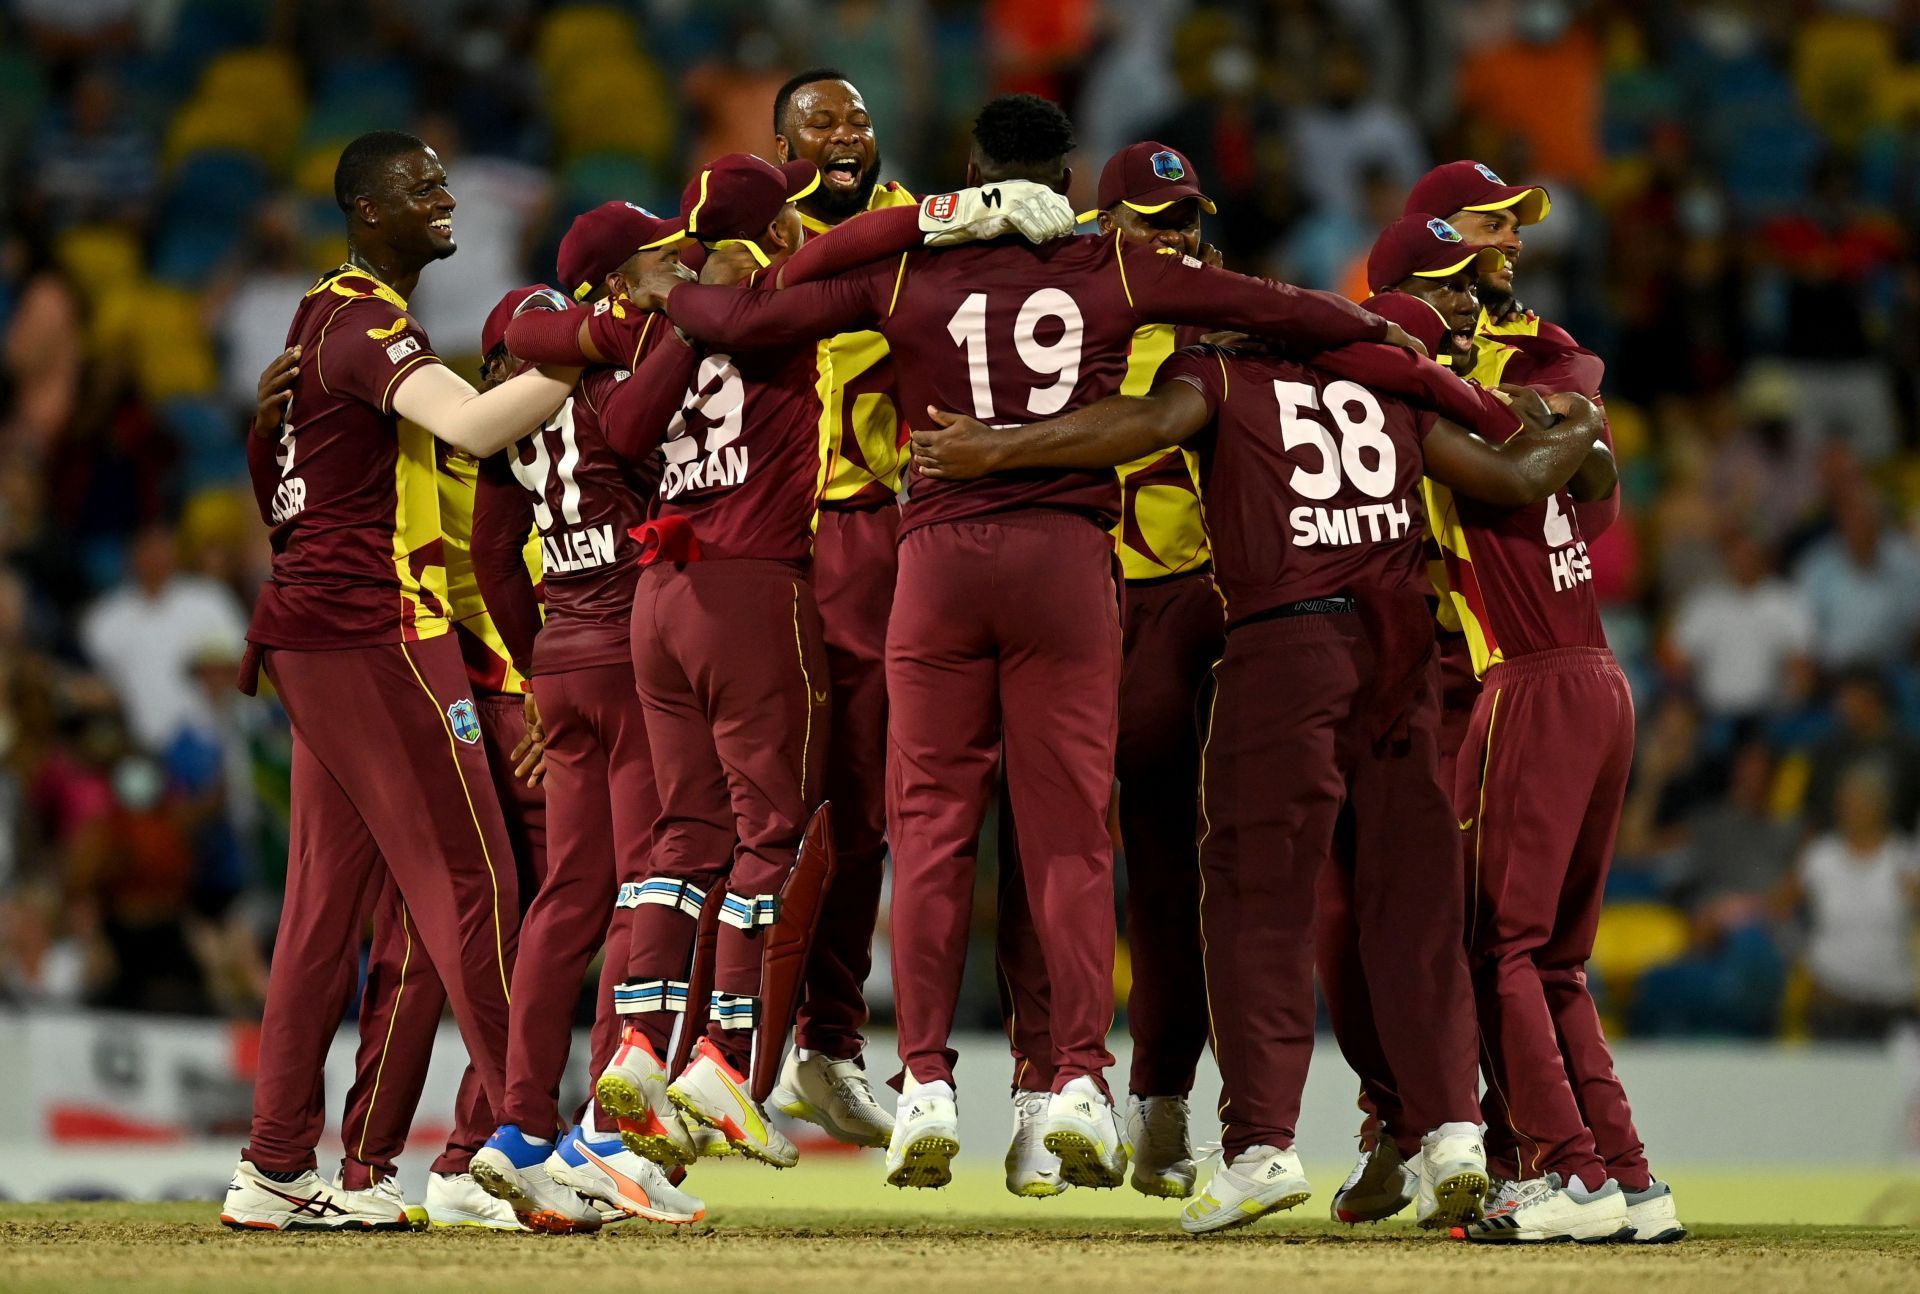 West Indies need to win both T20Is to win the series.